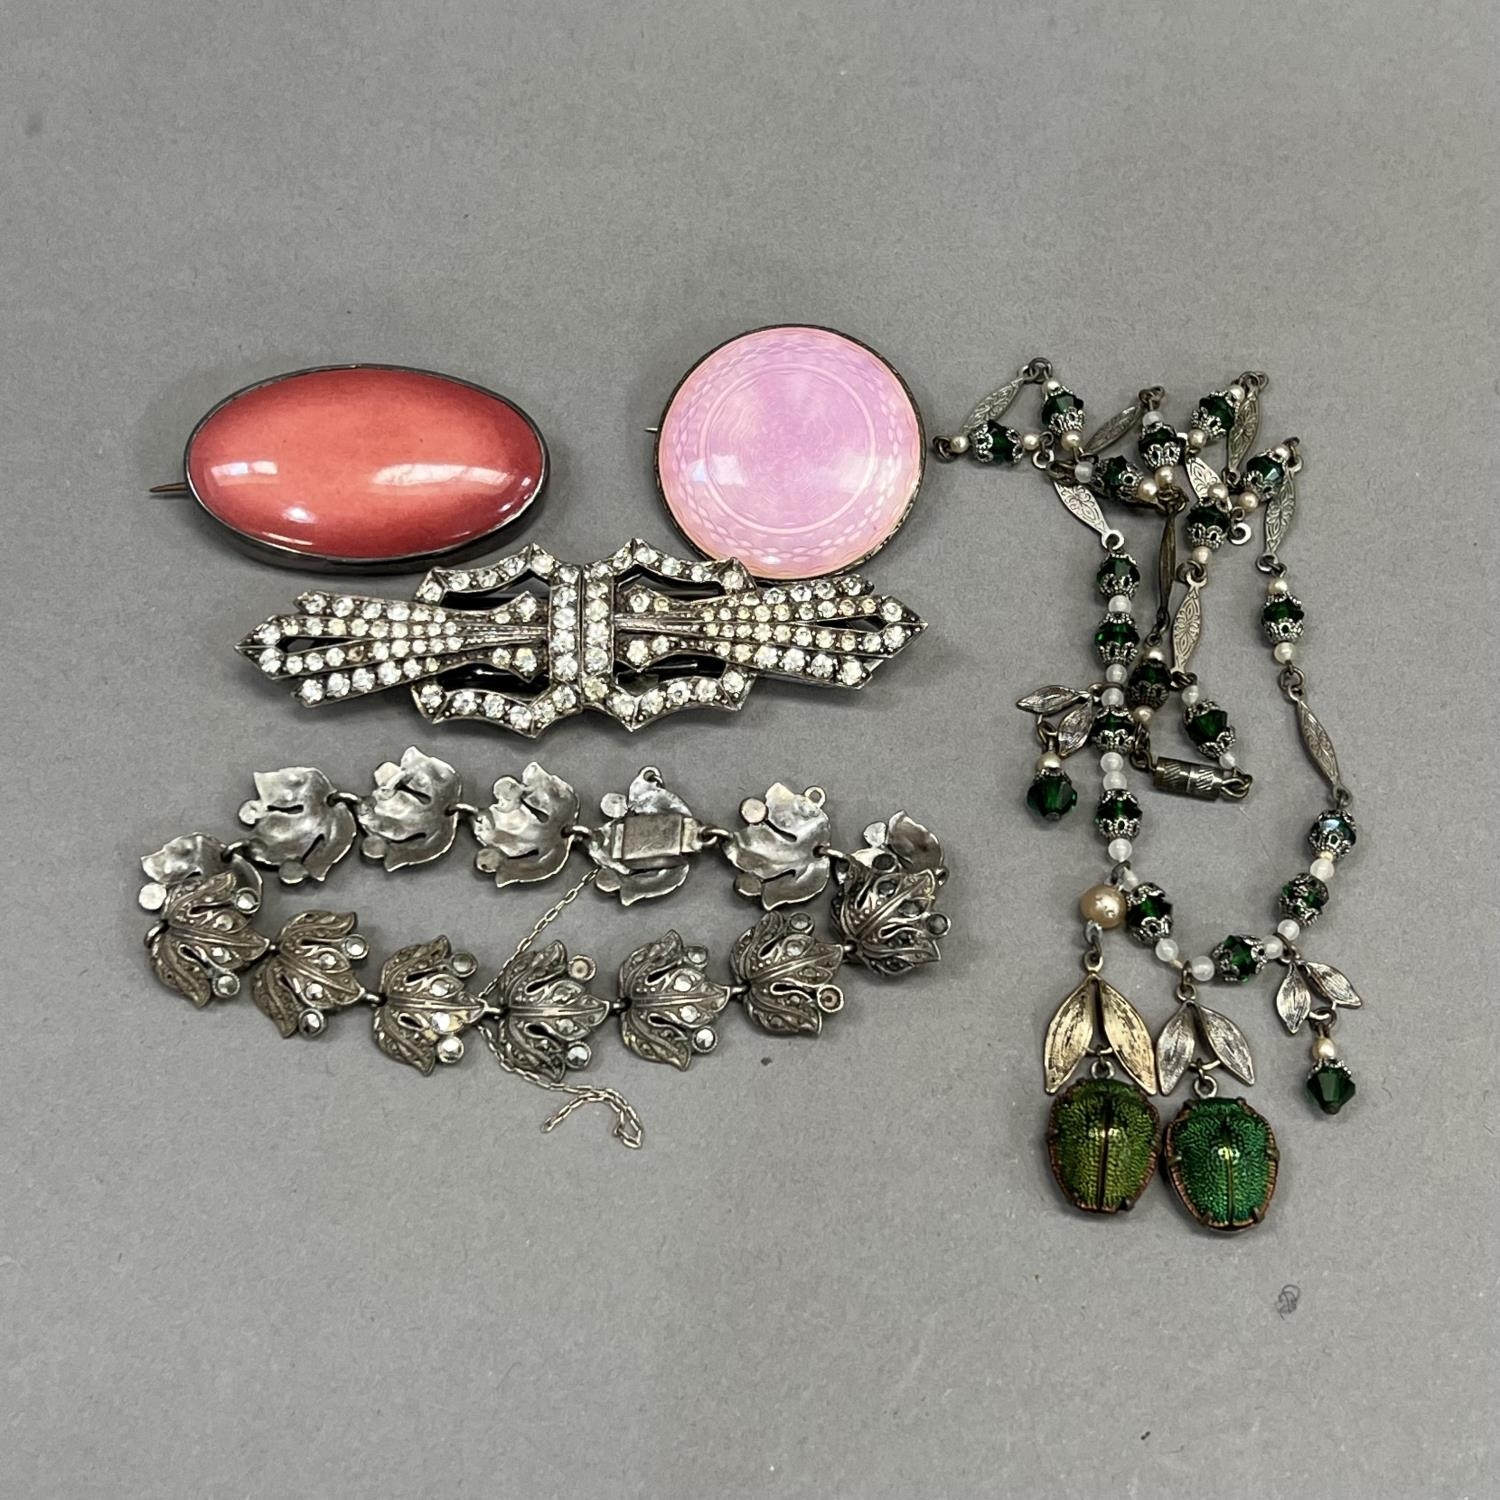 A small collection of early to mid 20th century silver jewellery including a Kensington art